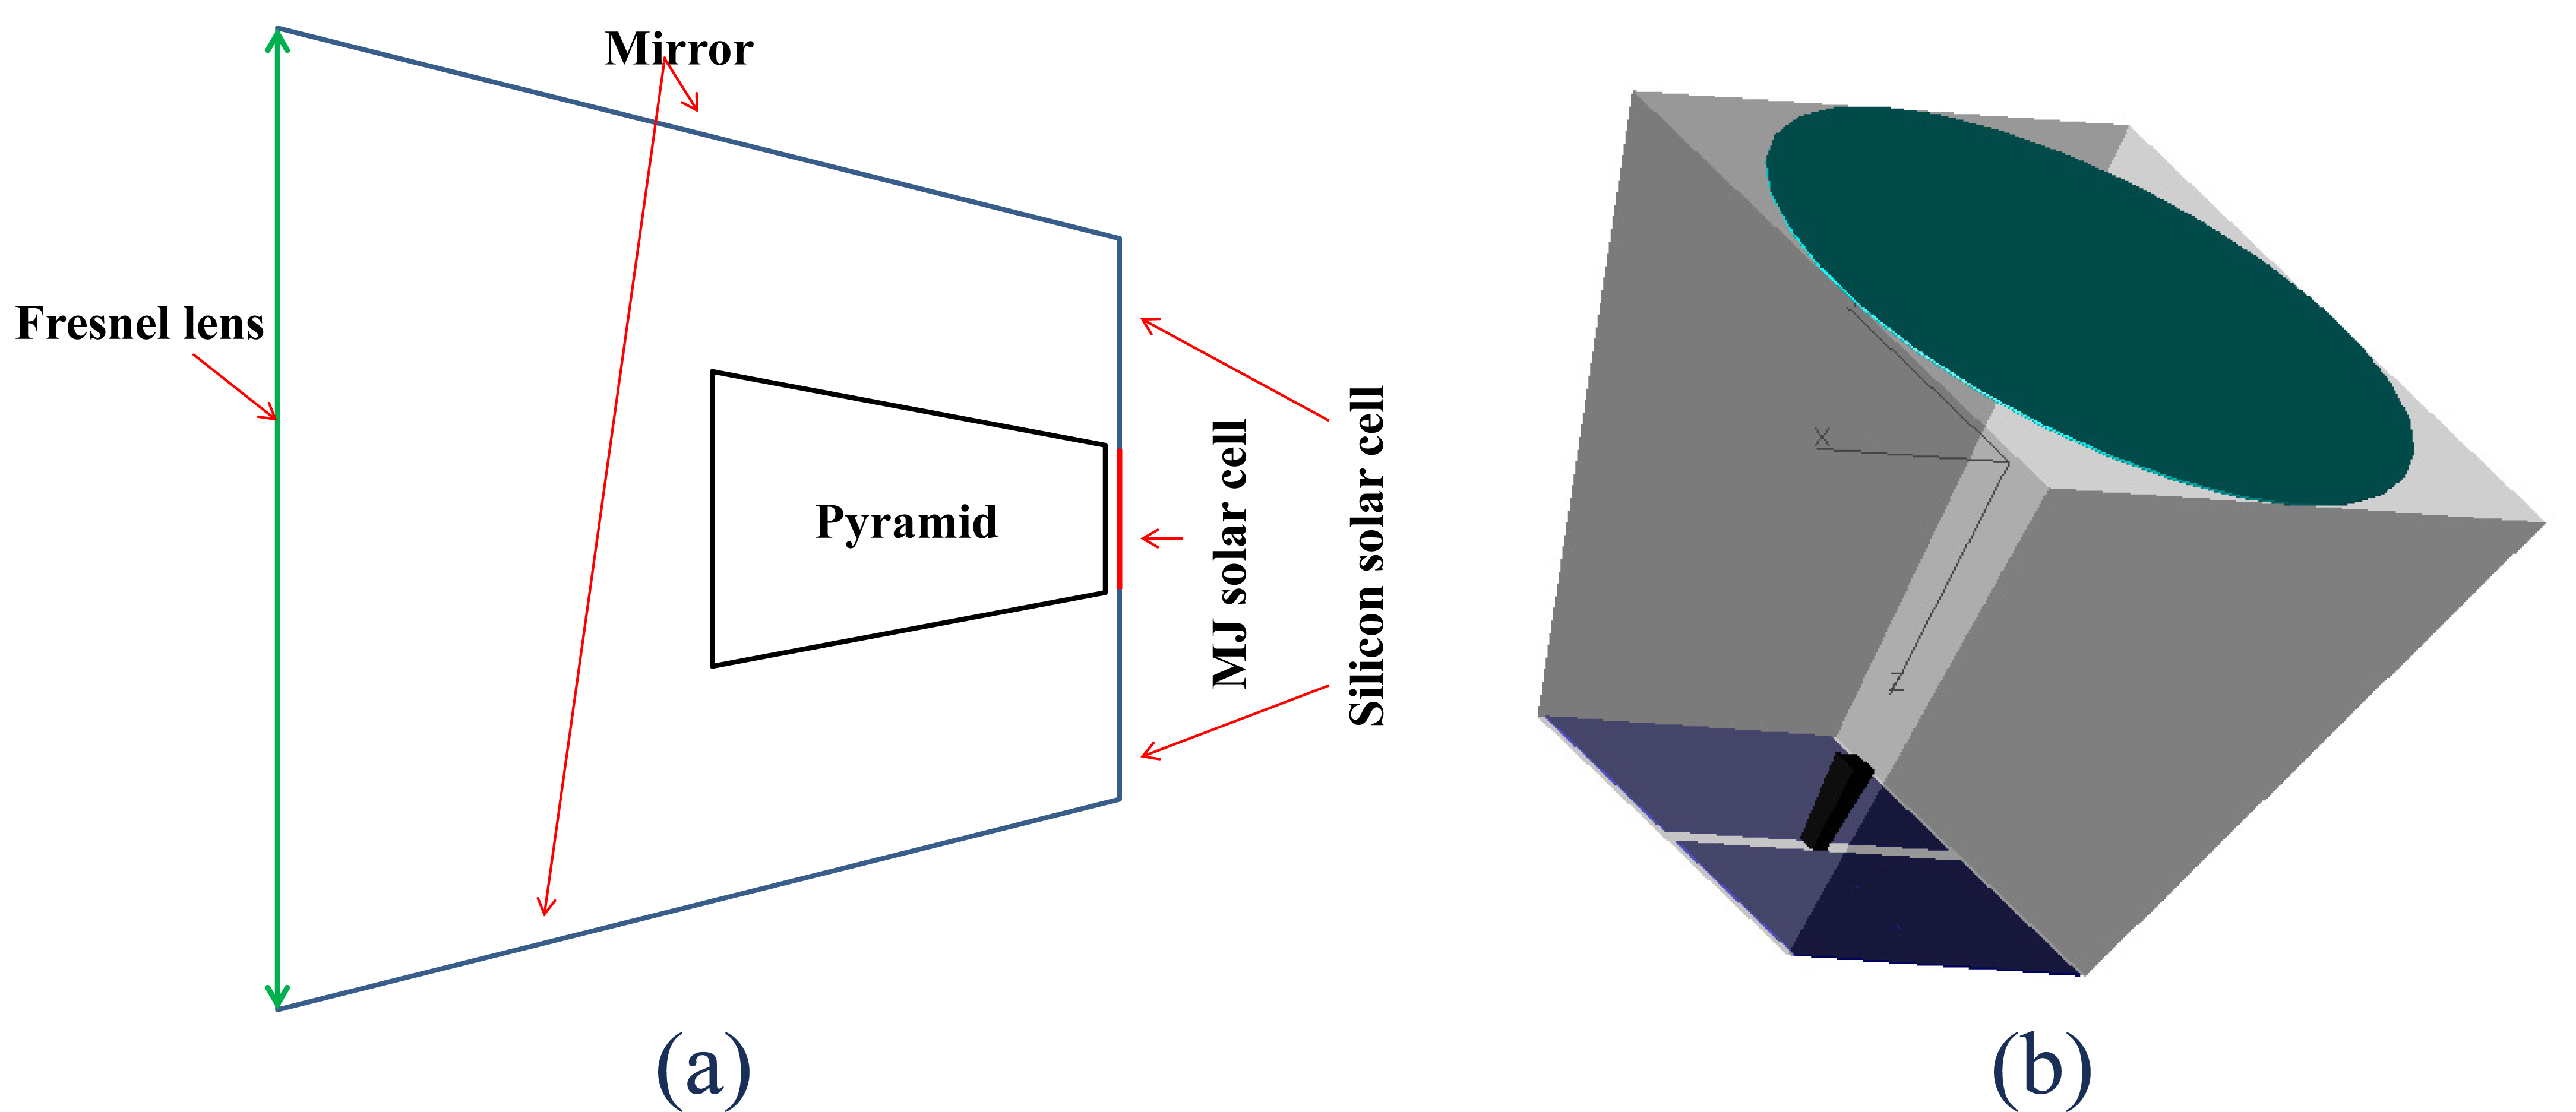 Hybrid CPV system surrounded by mirrors (a) 2D and (b) 3D views.